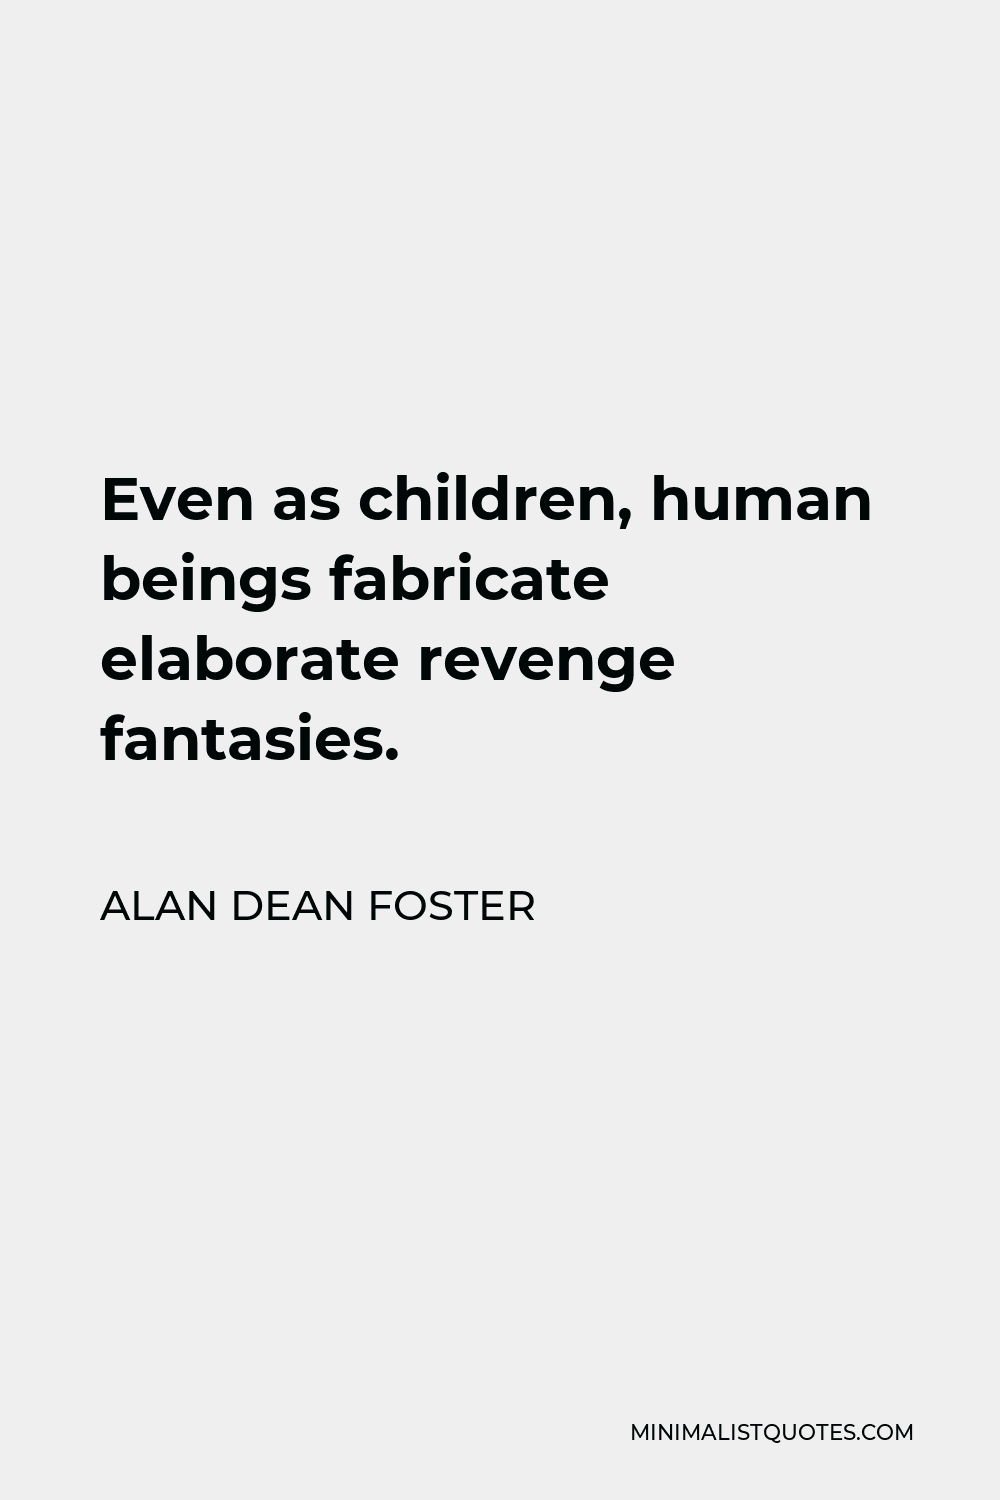 Alan Dean Foster Quote - Even as children, human beings fabricate elaborate revenge fantasies.